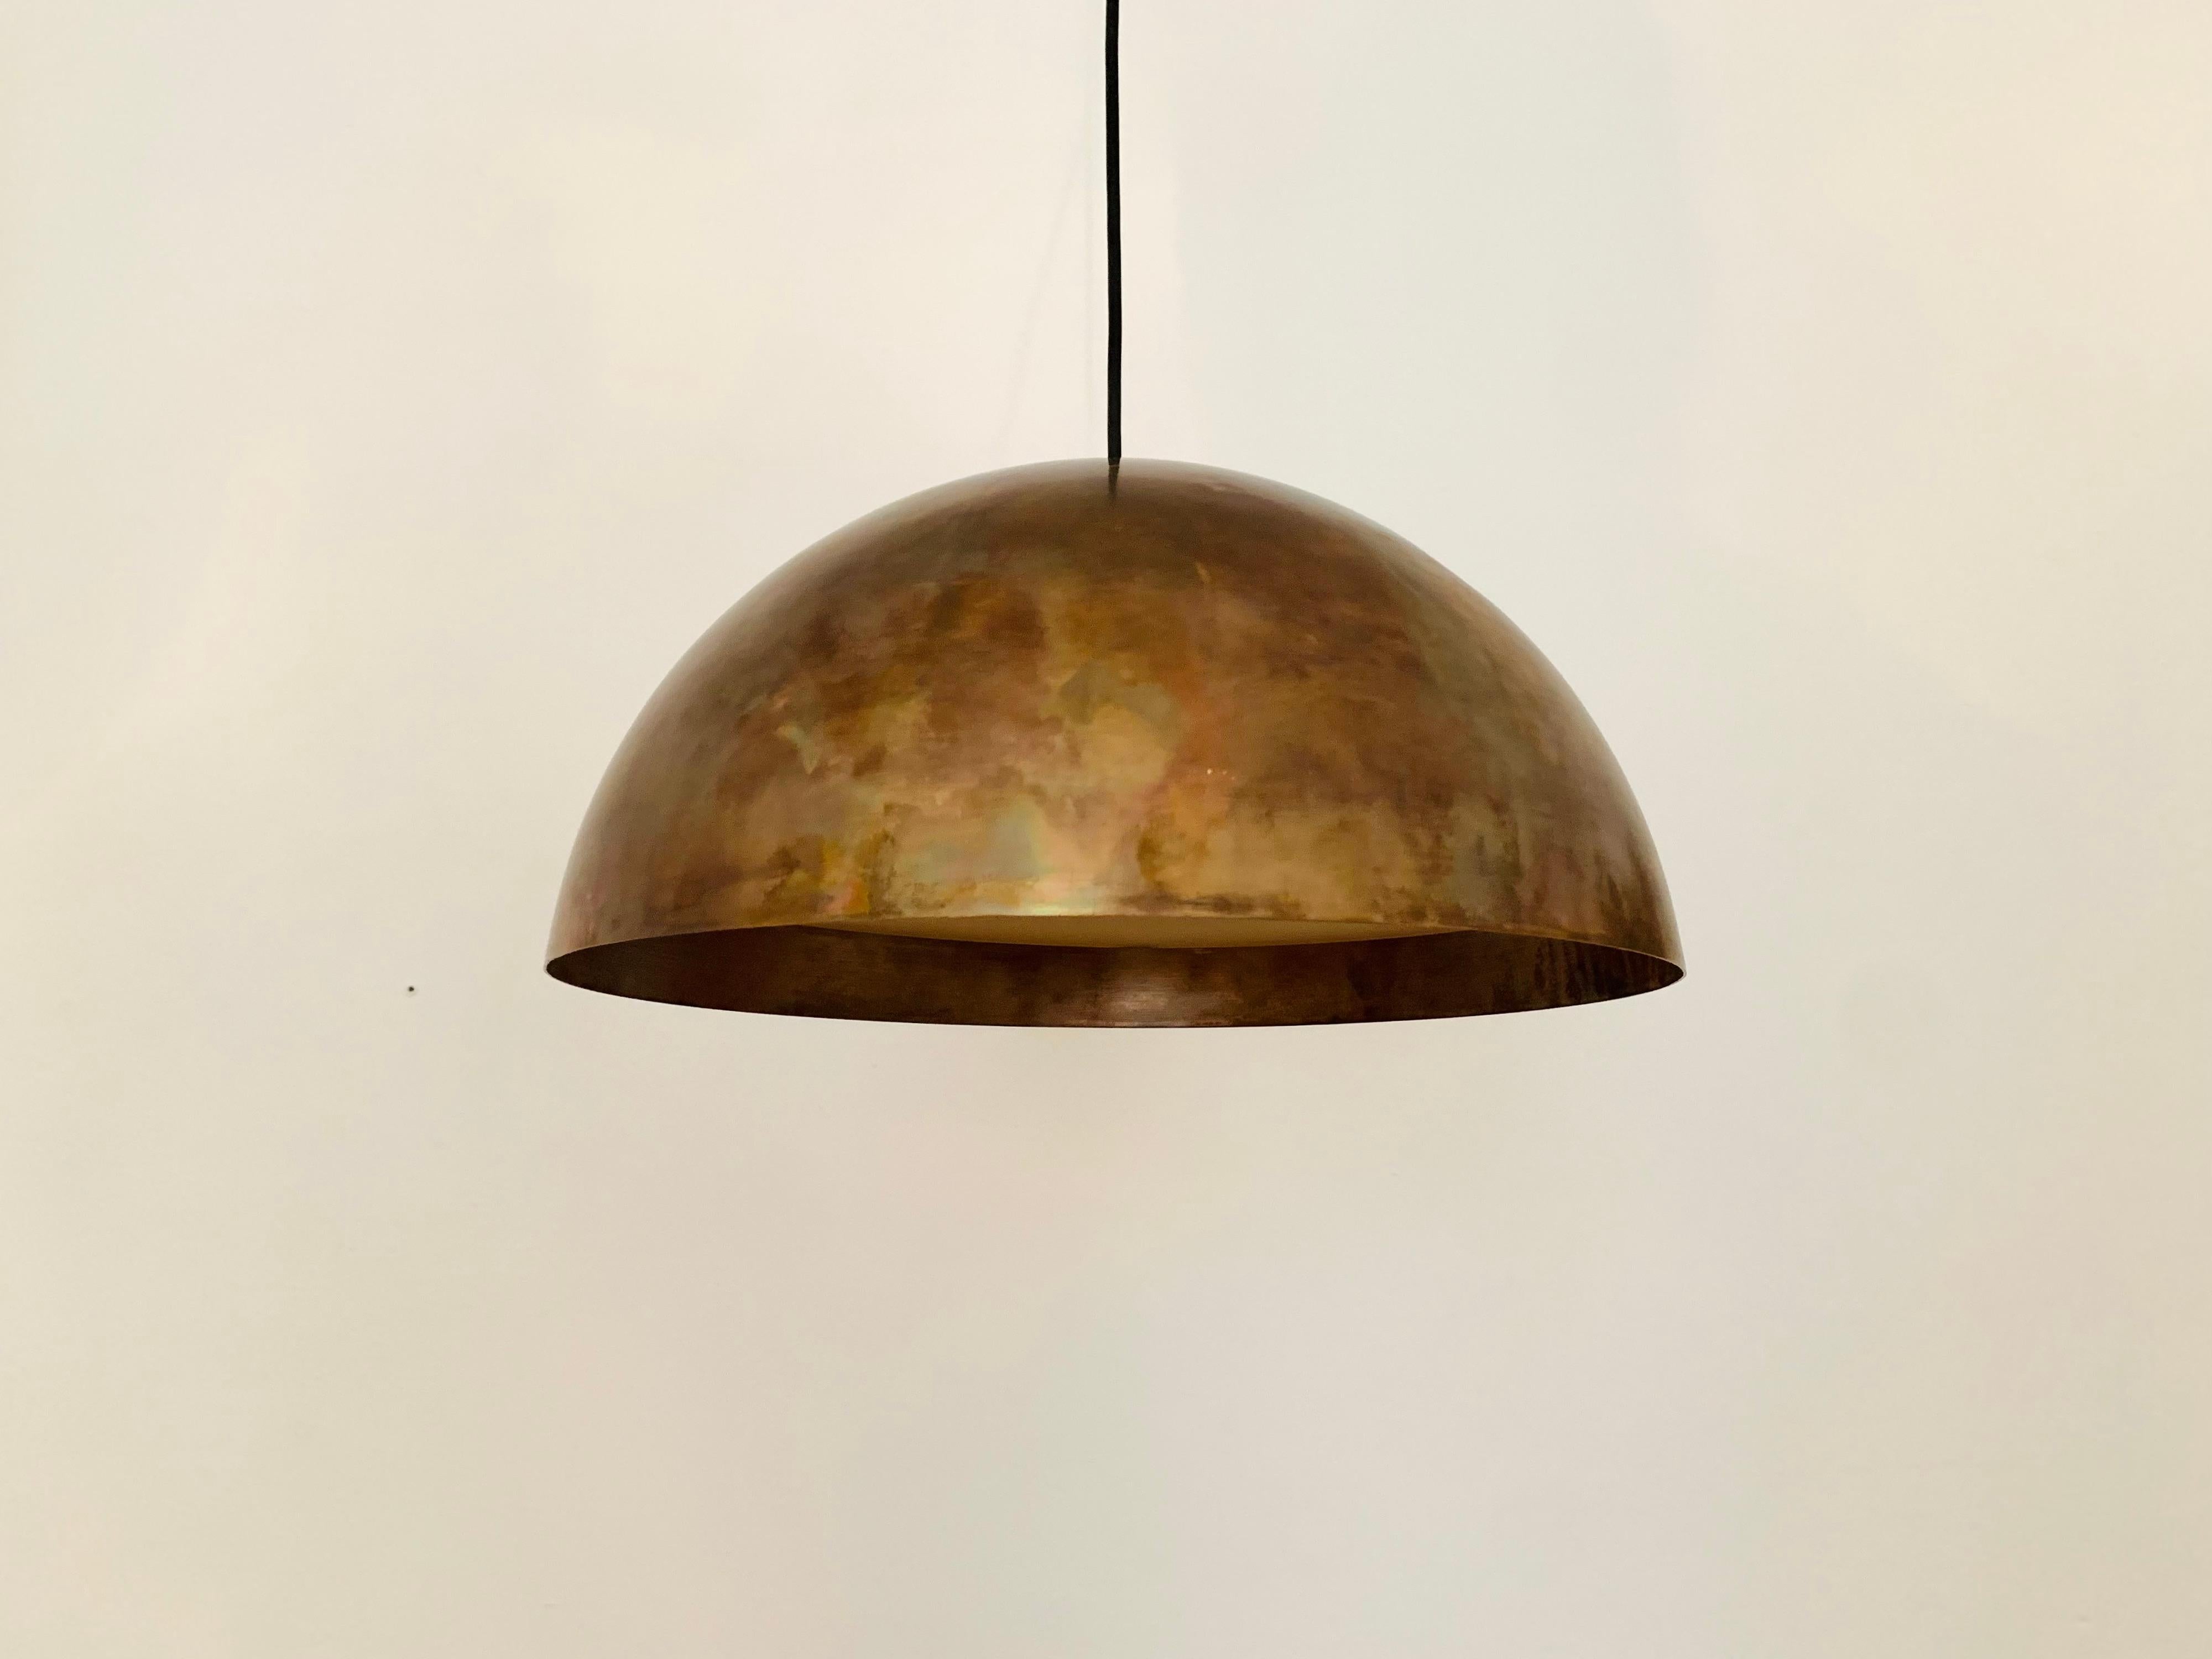 Extremely beautifully patinated copper pendant lamp from the 1960s.
High quality workmanship and extremely beautiful design.
An enrichment for every home and a unique piece.
A cozy lighting mood arises.

Manufacturer: Beisl

Condition:

Very good